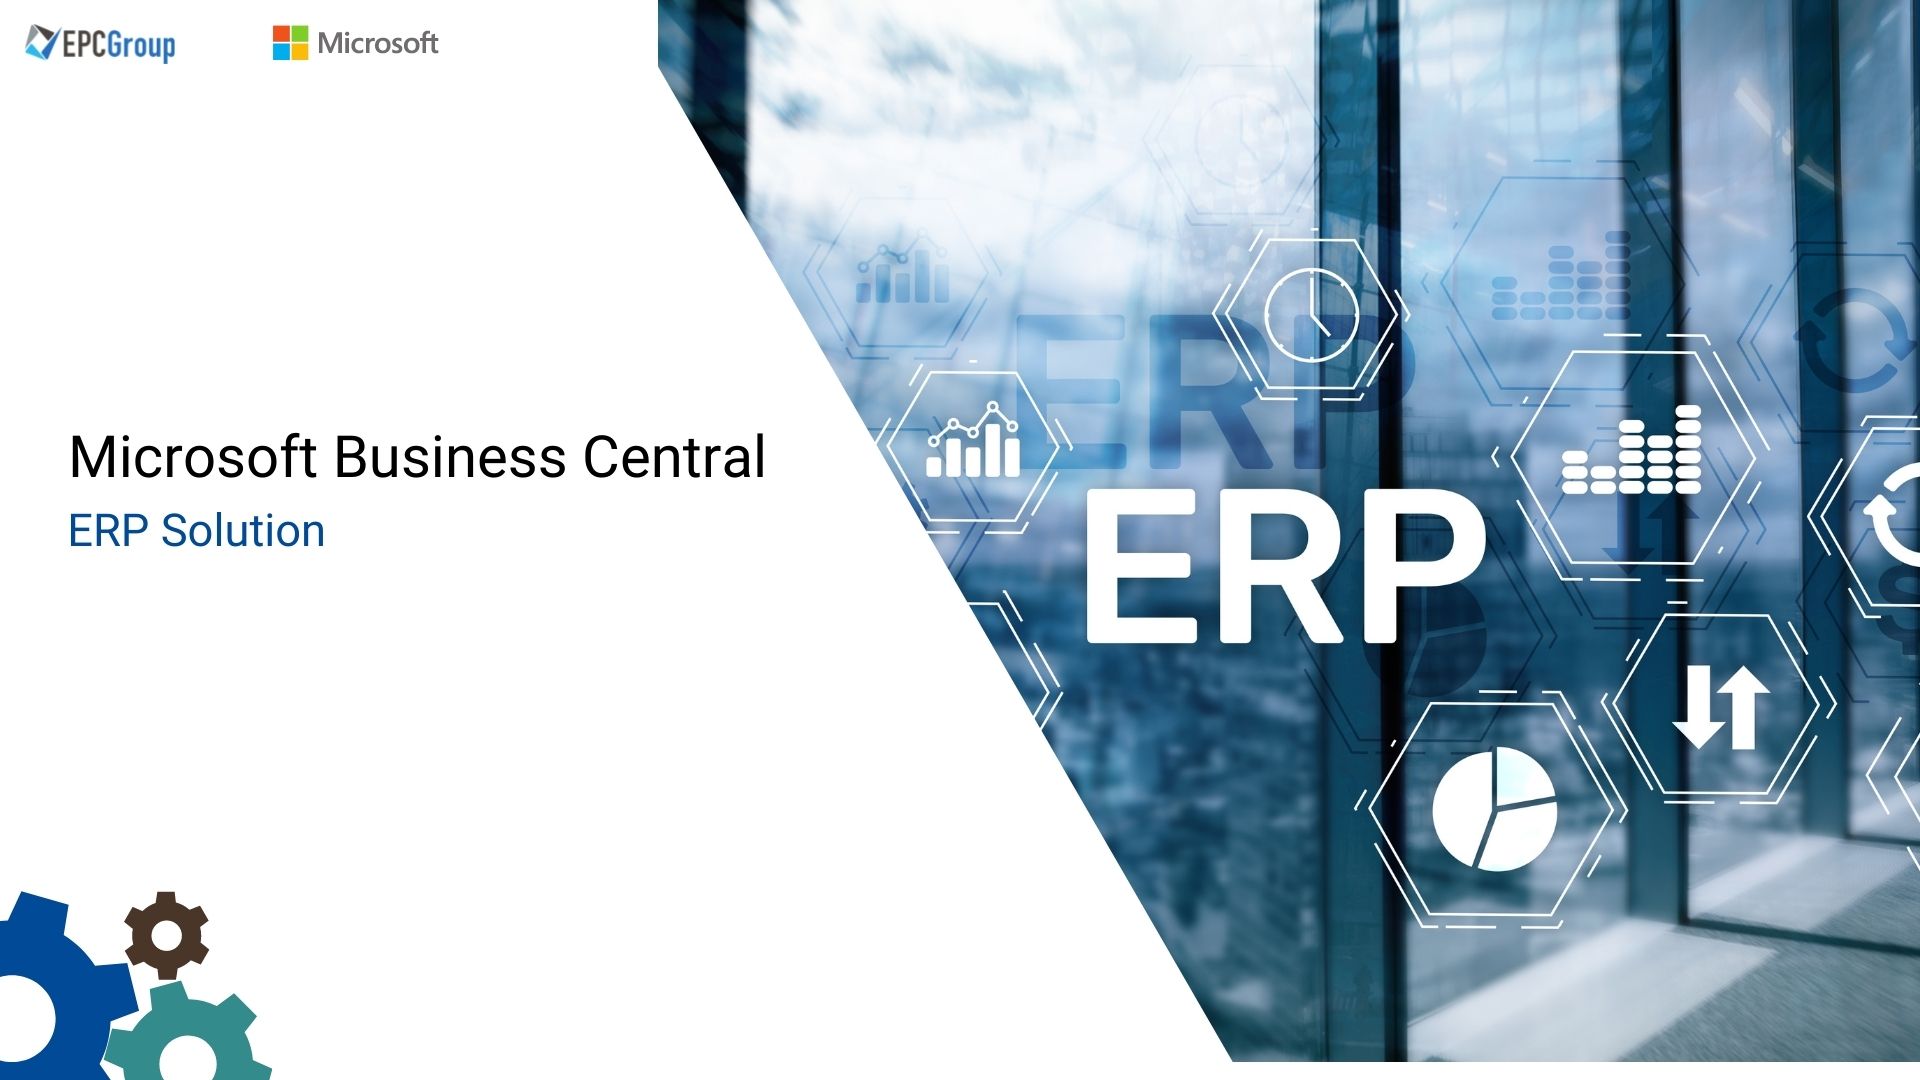 WHY MICROSOFT BUSINESS CENTRAL IS THE BEST ERP SOLUTION IN THE MARKET?